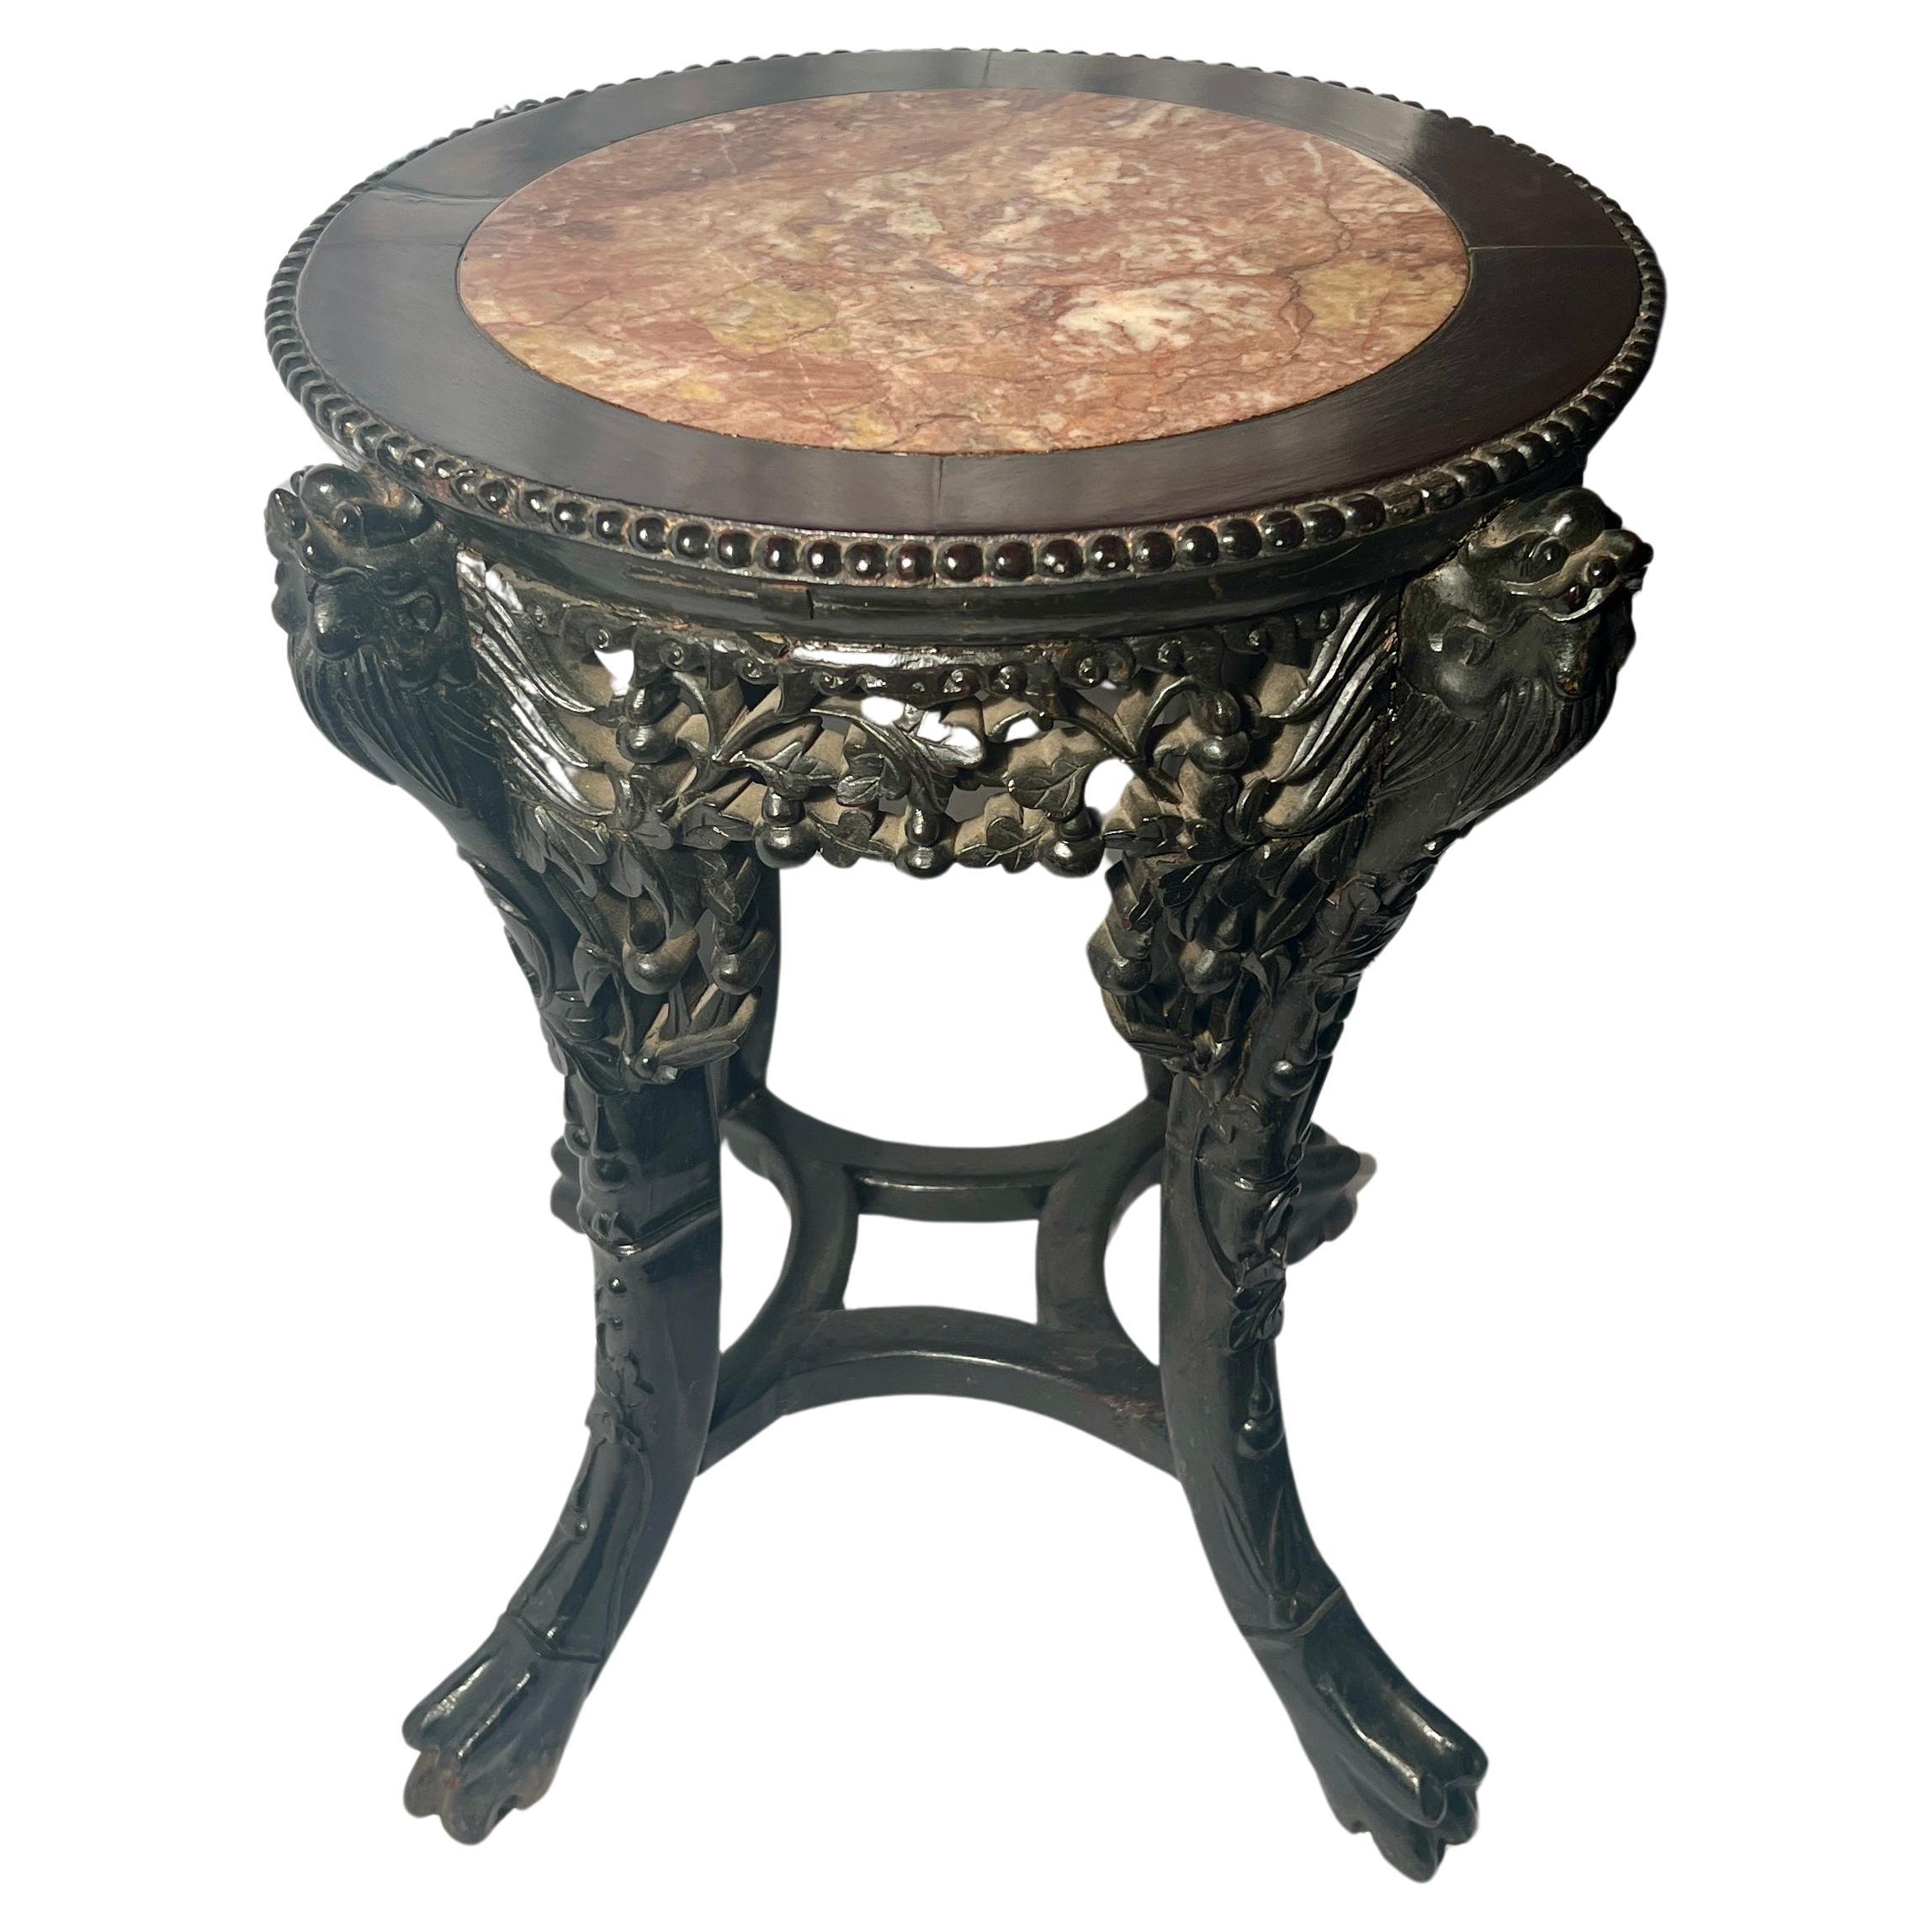 20th Century Antique Oriental Carved Teak Wood Marble Top Stand, Circa 1900's. For Sale